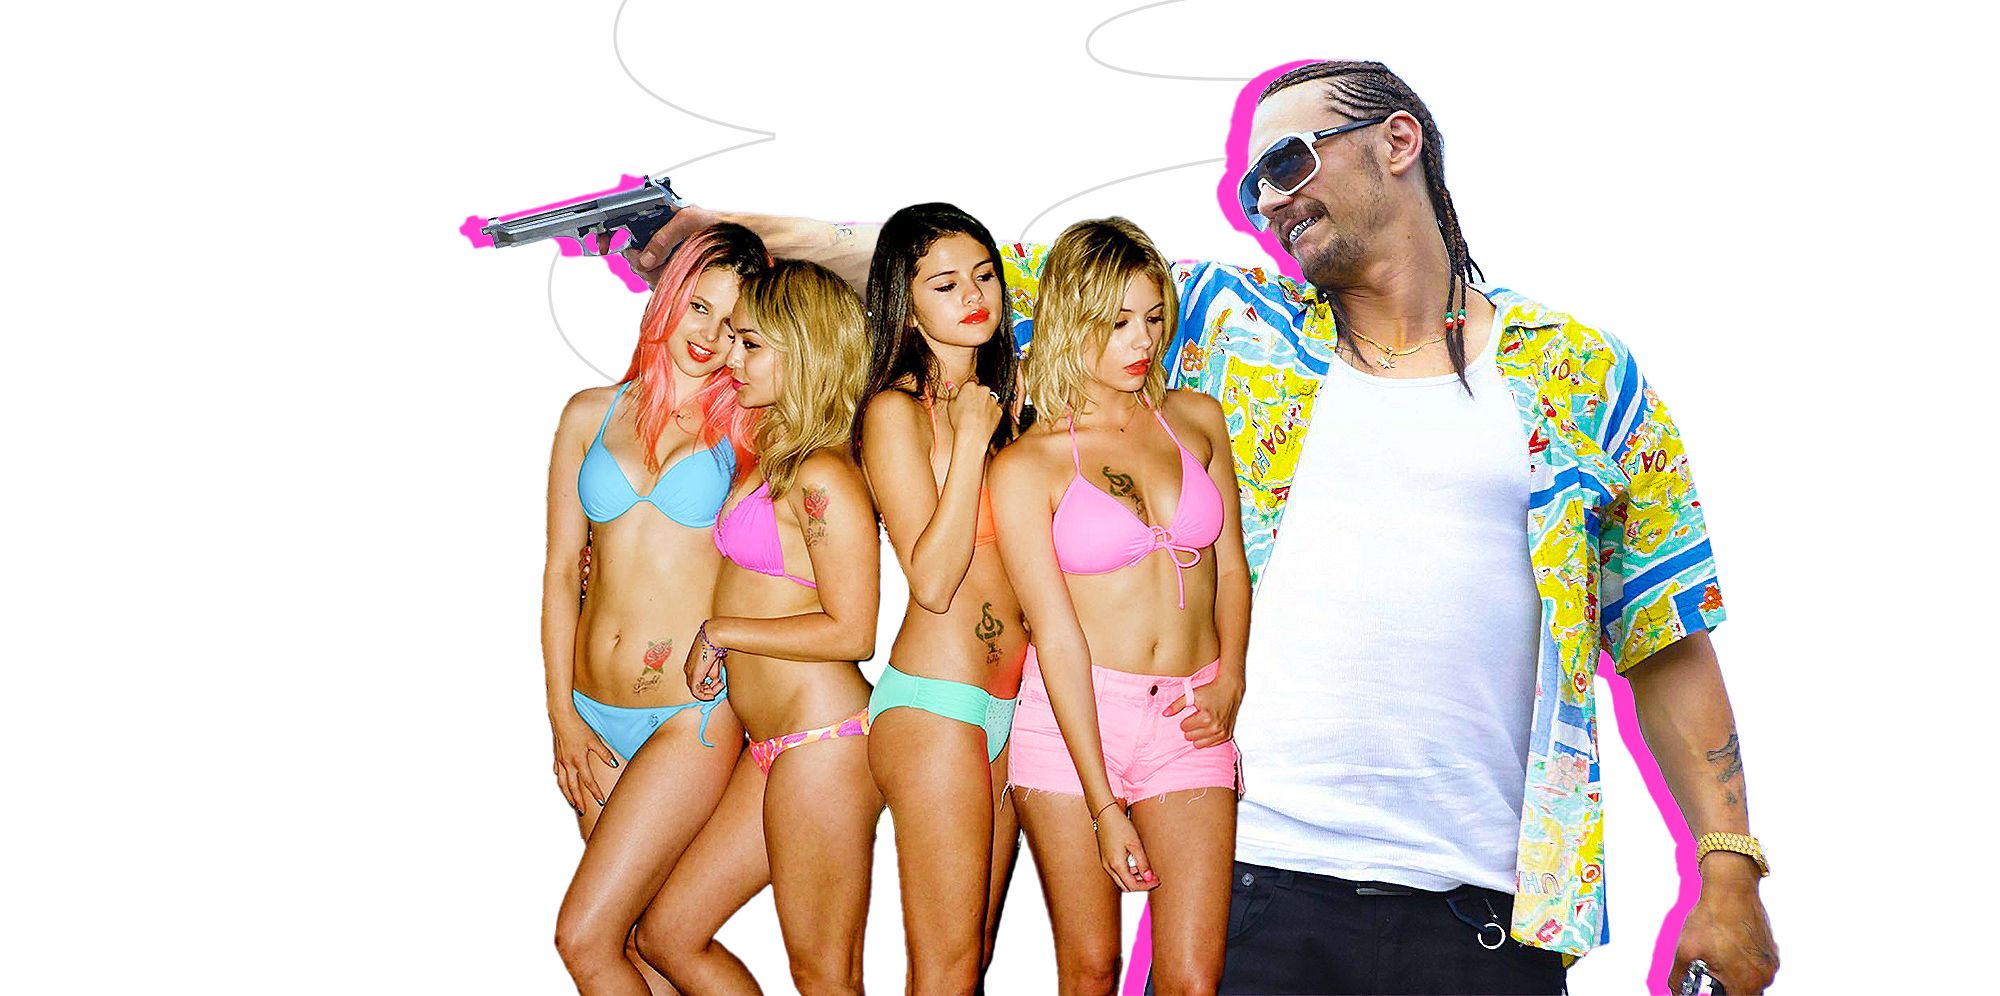 alexey lee add spring breakers movie download photo